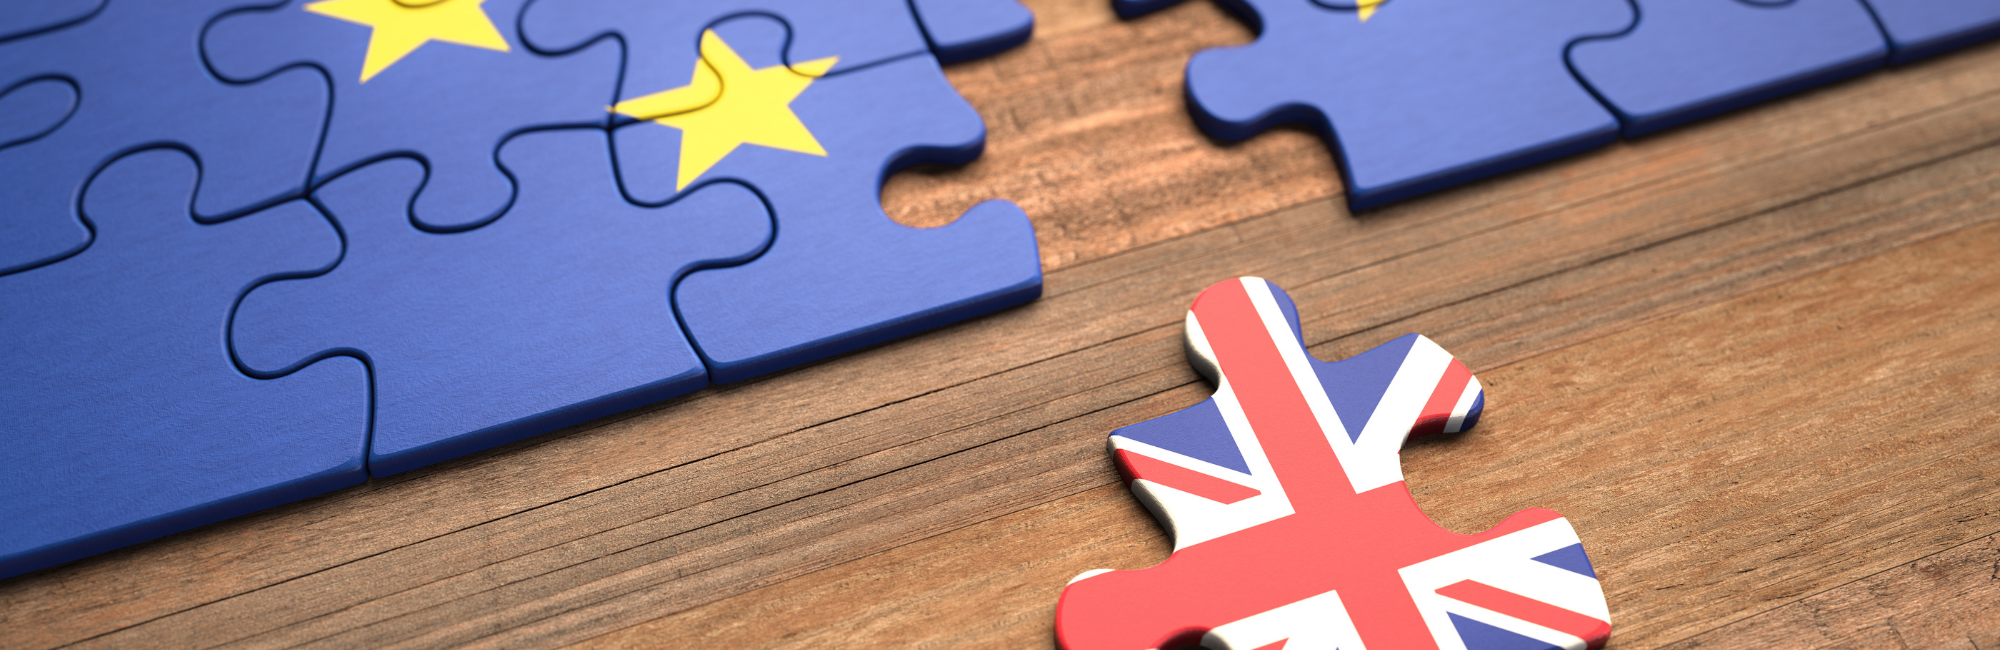 Brexit and Professional Services recruitment - what now?